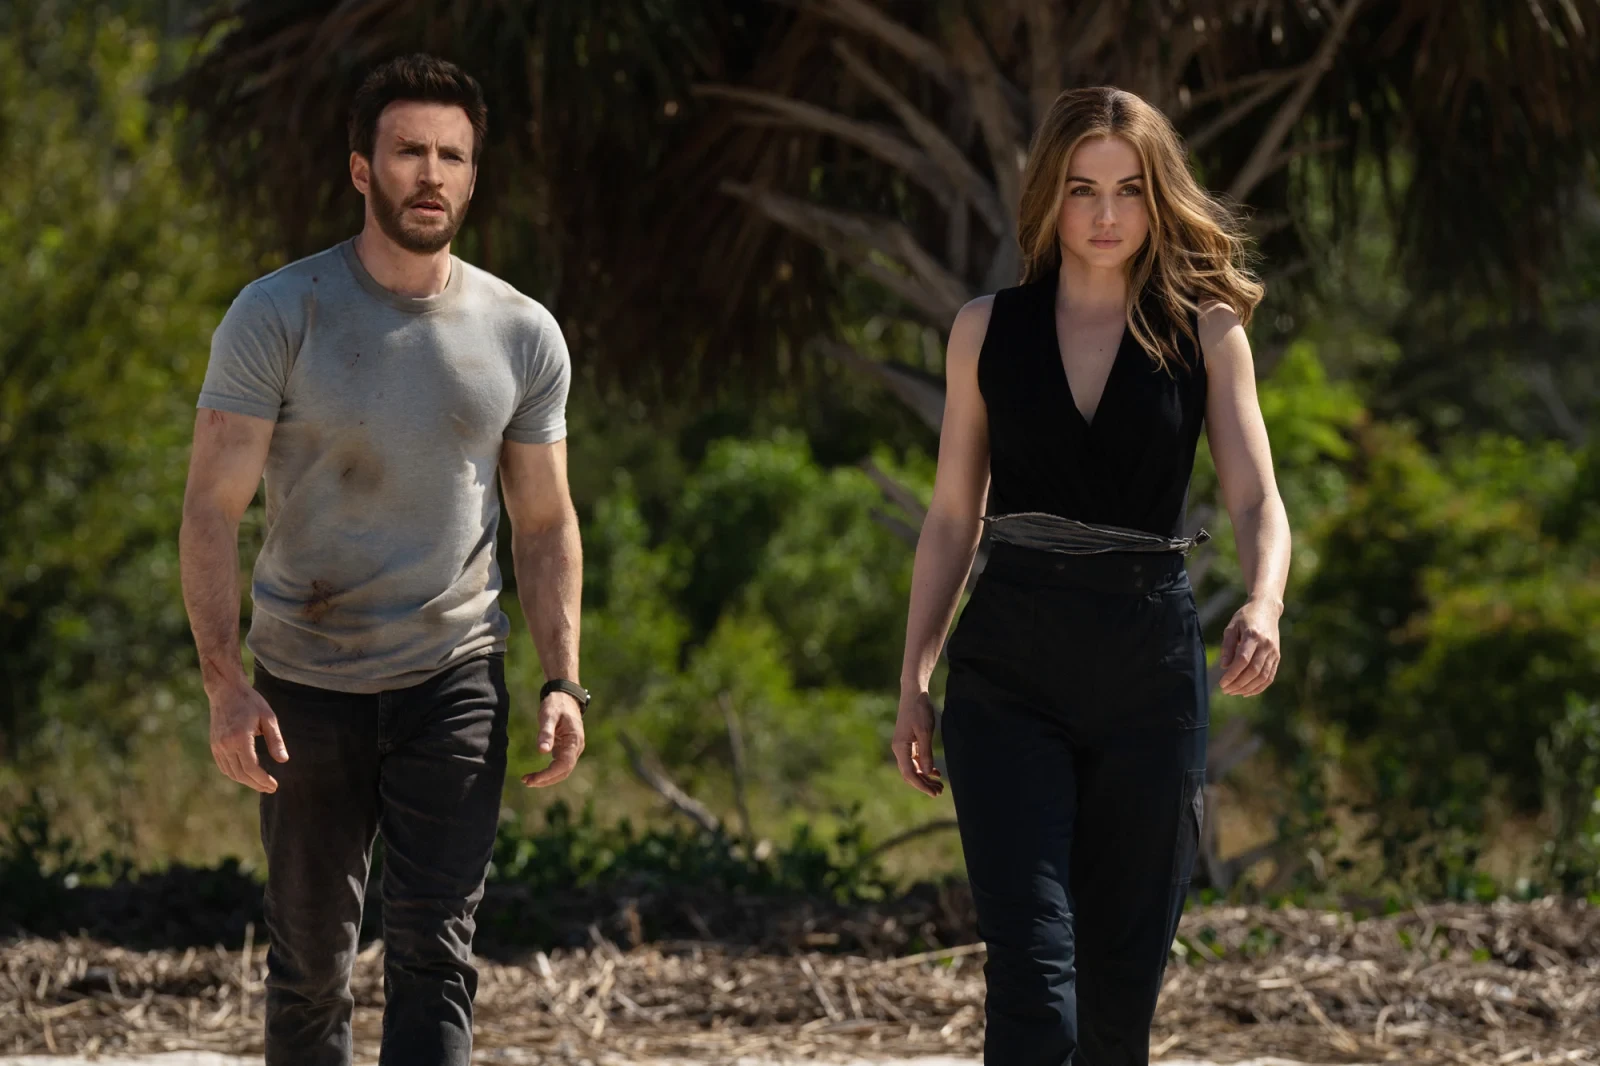 Chris Evans and Ana de Armas in a still from Ghosted